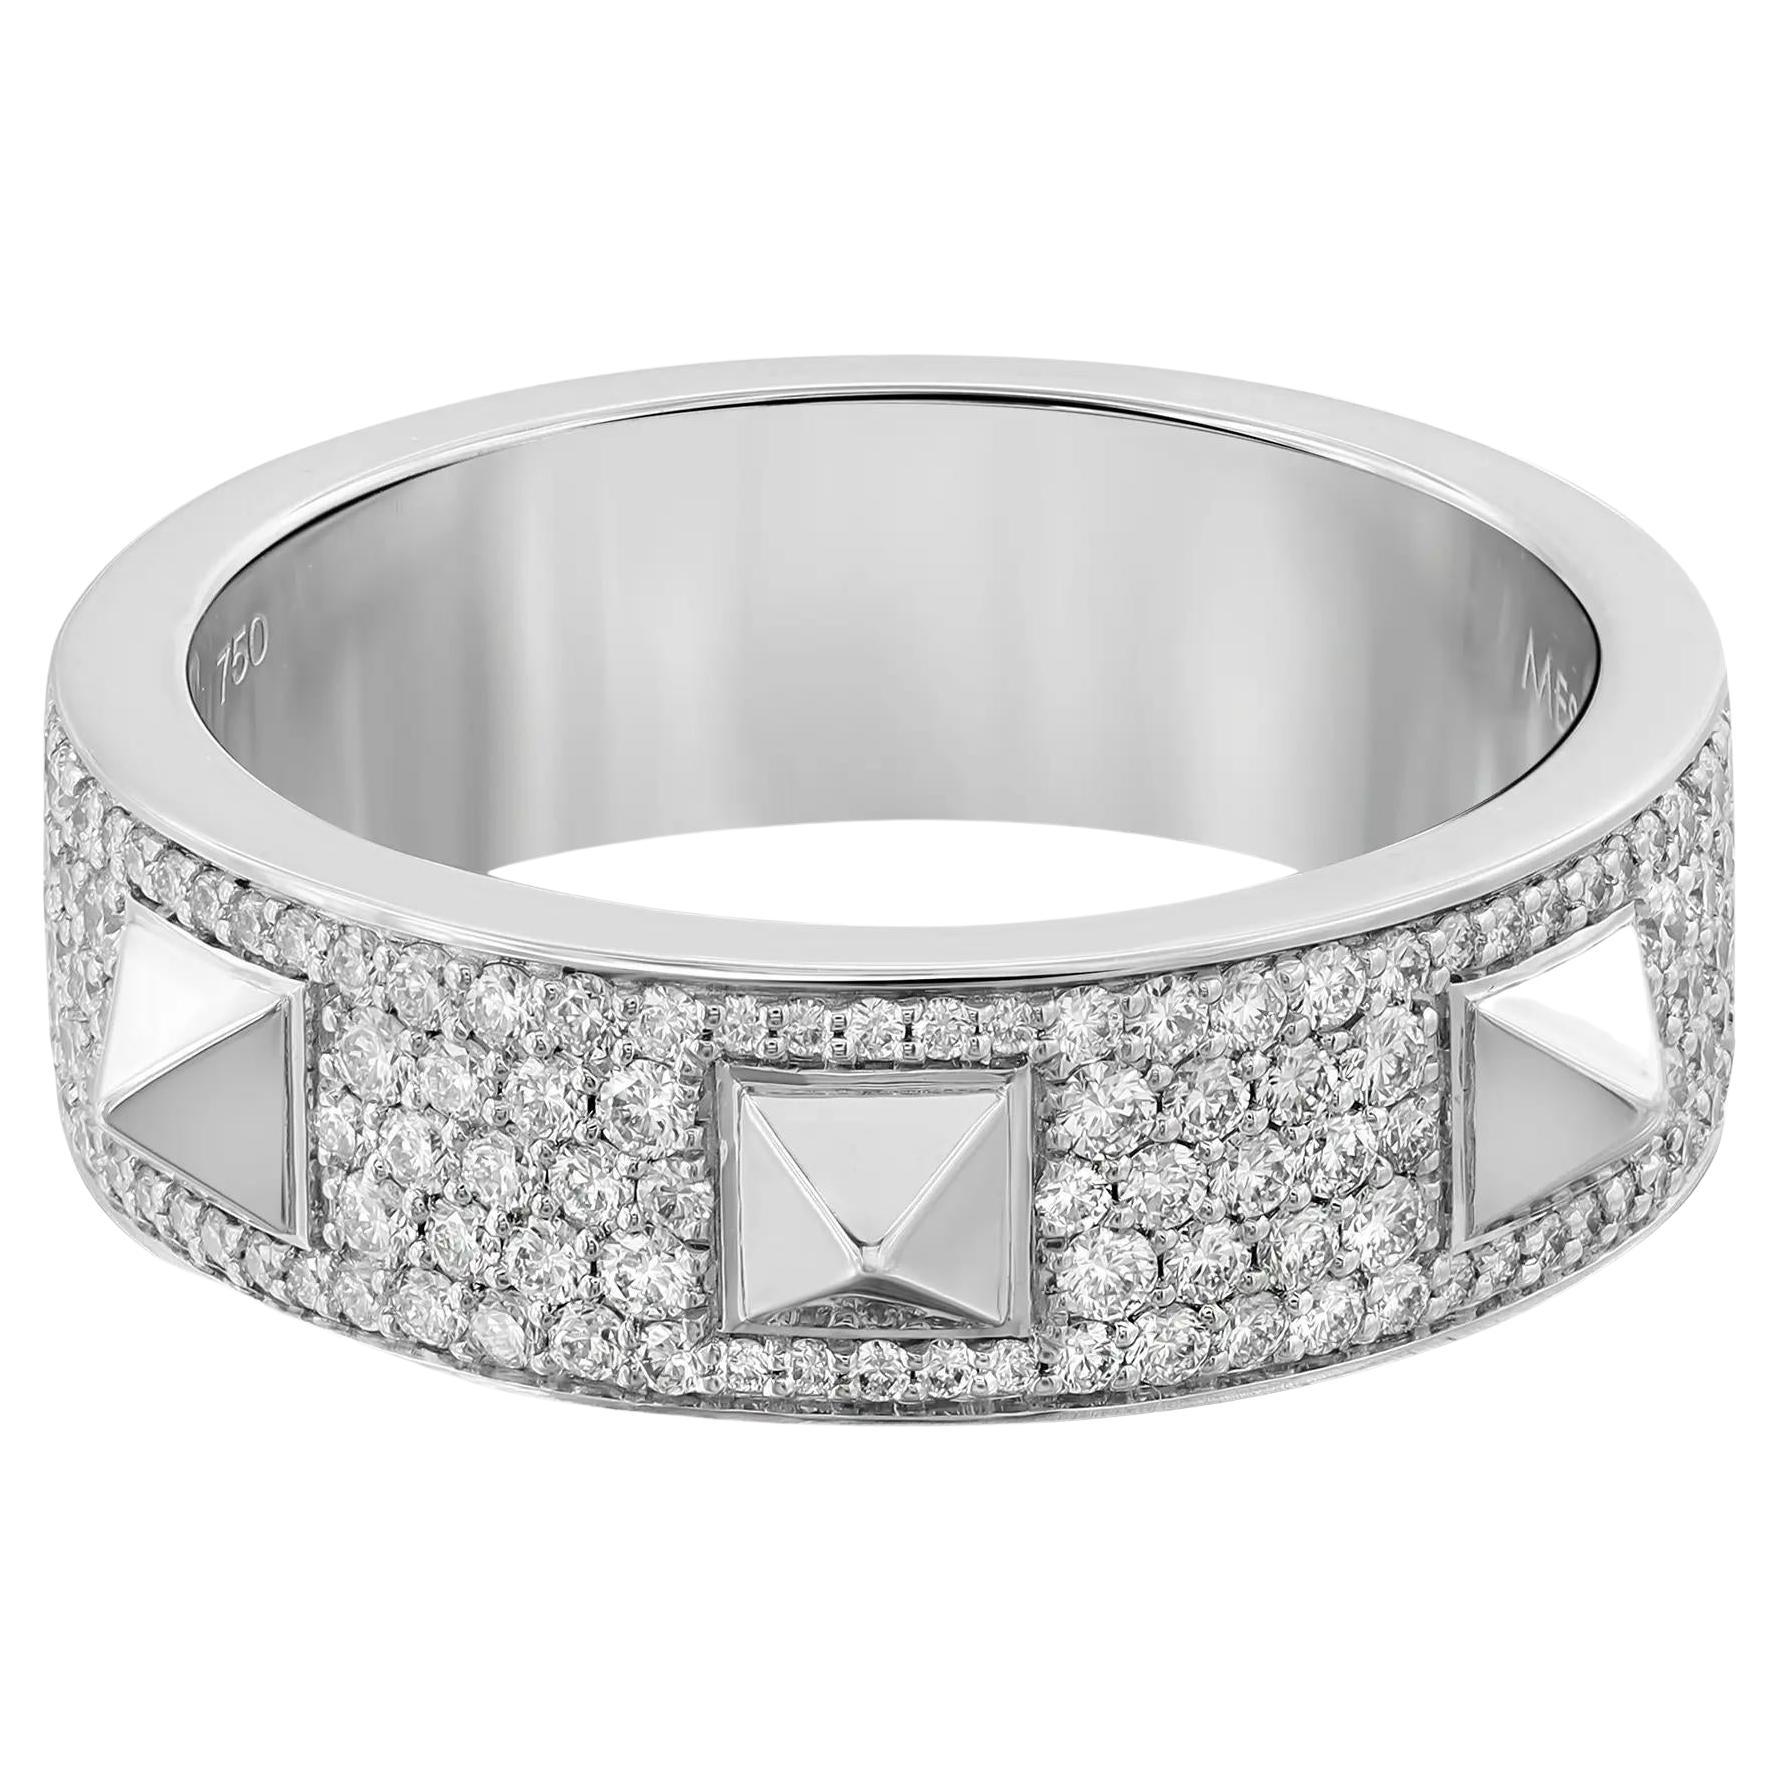 Messika 0.61Cttw Spiky Diamond Band Ring 18K White Gold Size 57 US 8.25 For Sale